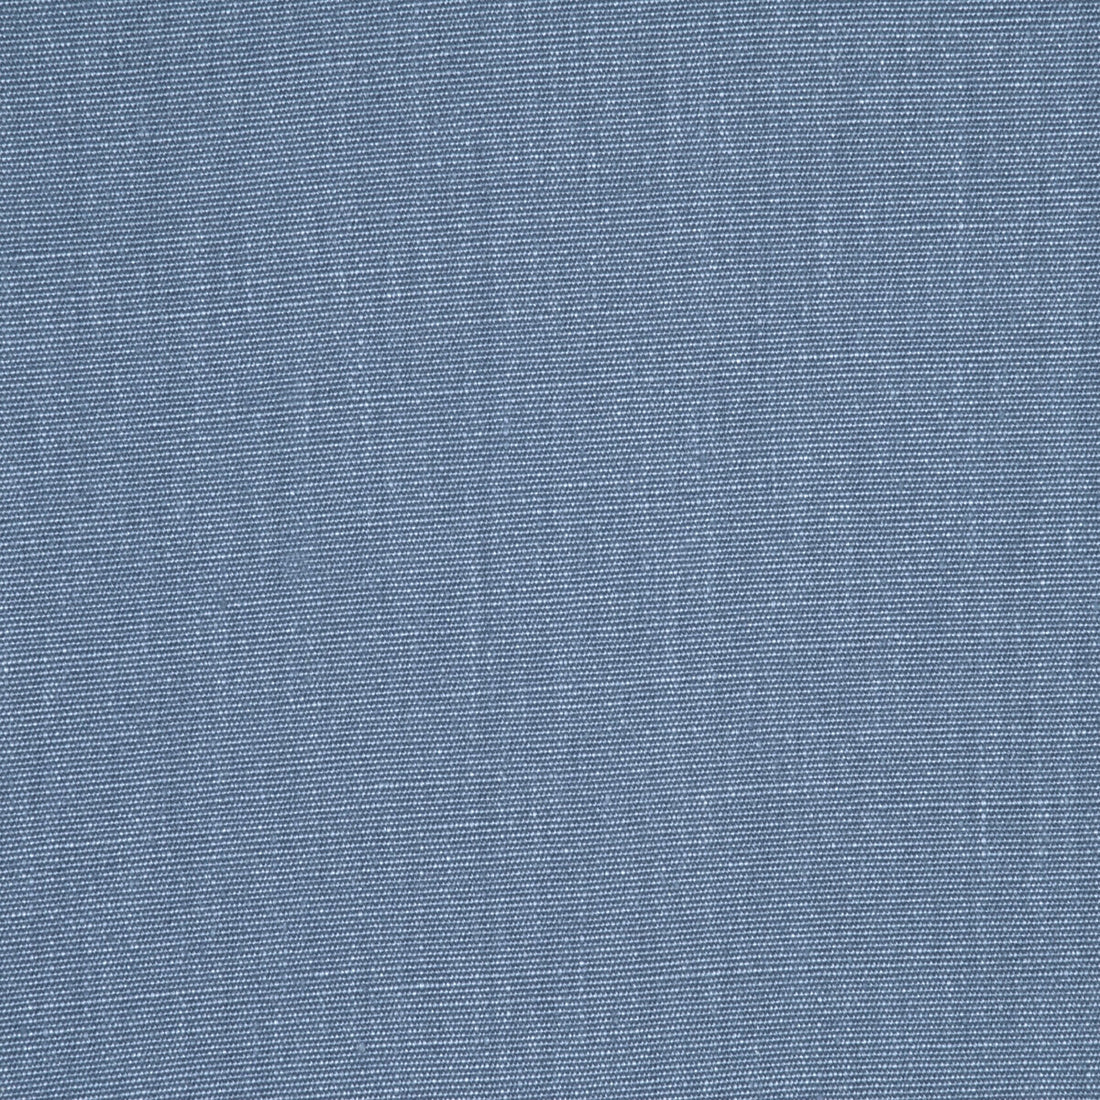 Sirocco fabric in blue color - pattern ED85166.628.0 - by Threads in the Fascination collection